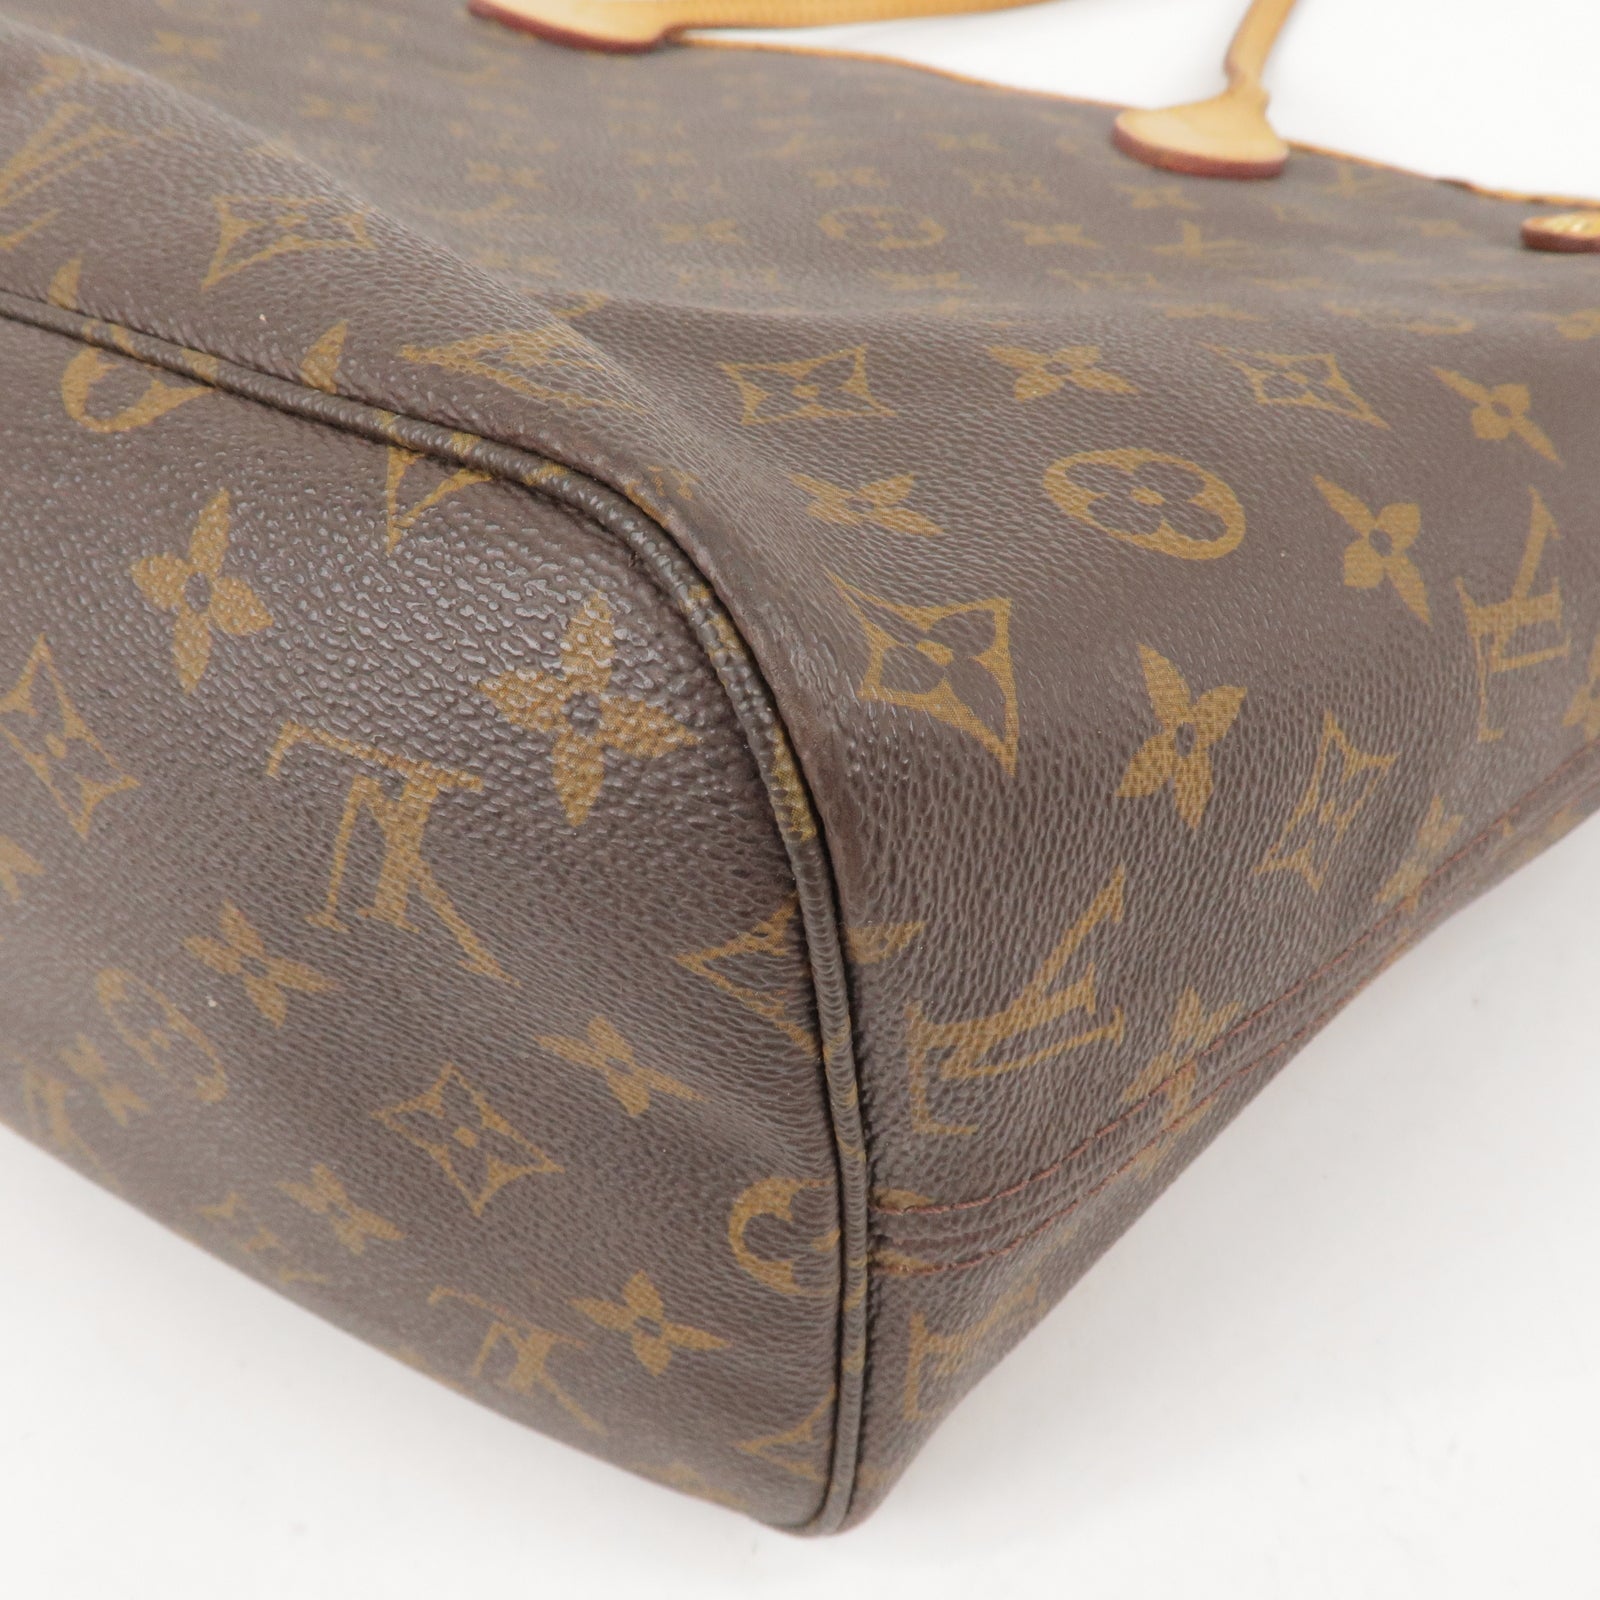 Auth Louis Vuitton Monogram Neverfull MM Tote Bag M40156 Used